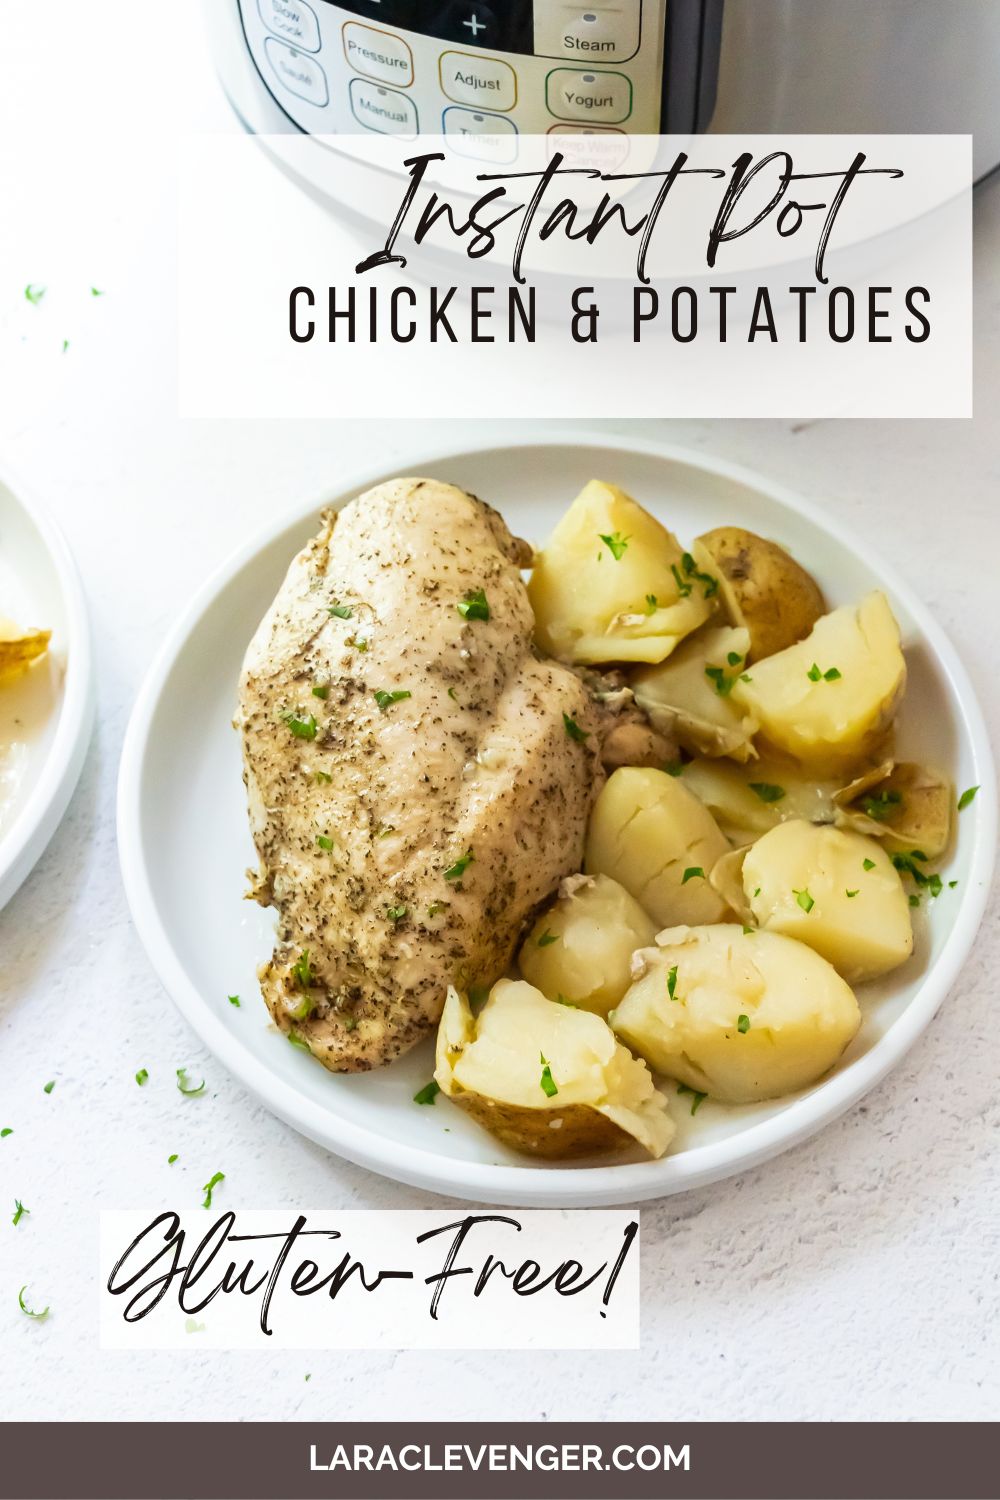 Instant Pot Chicken and Potatoes - Lara Clevenger